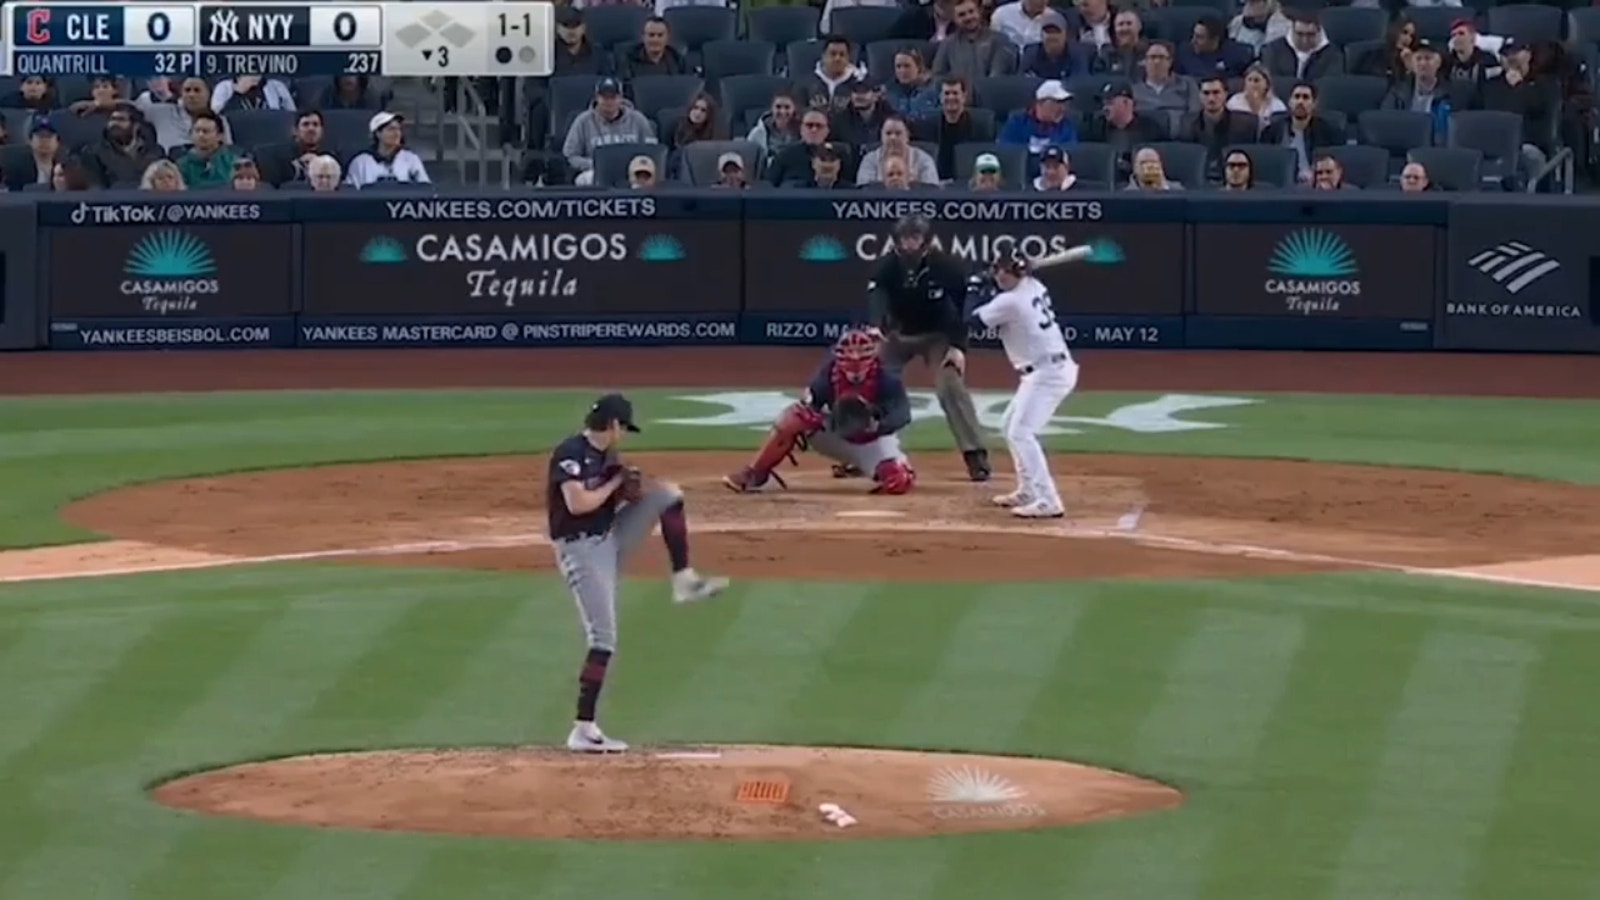 Jose Trevino cranks a solo home run to give the Yankees an early lead over the Guardians